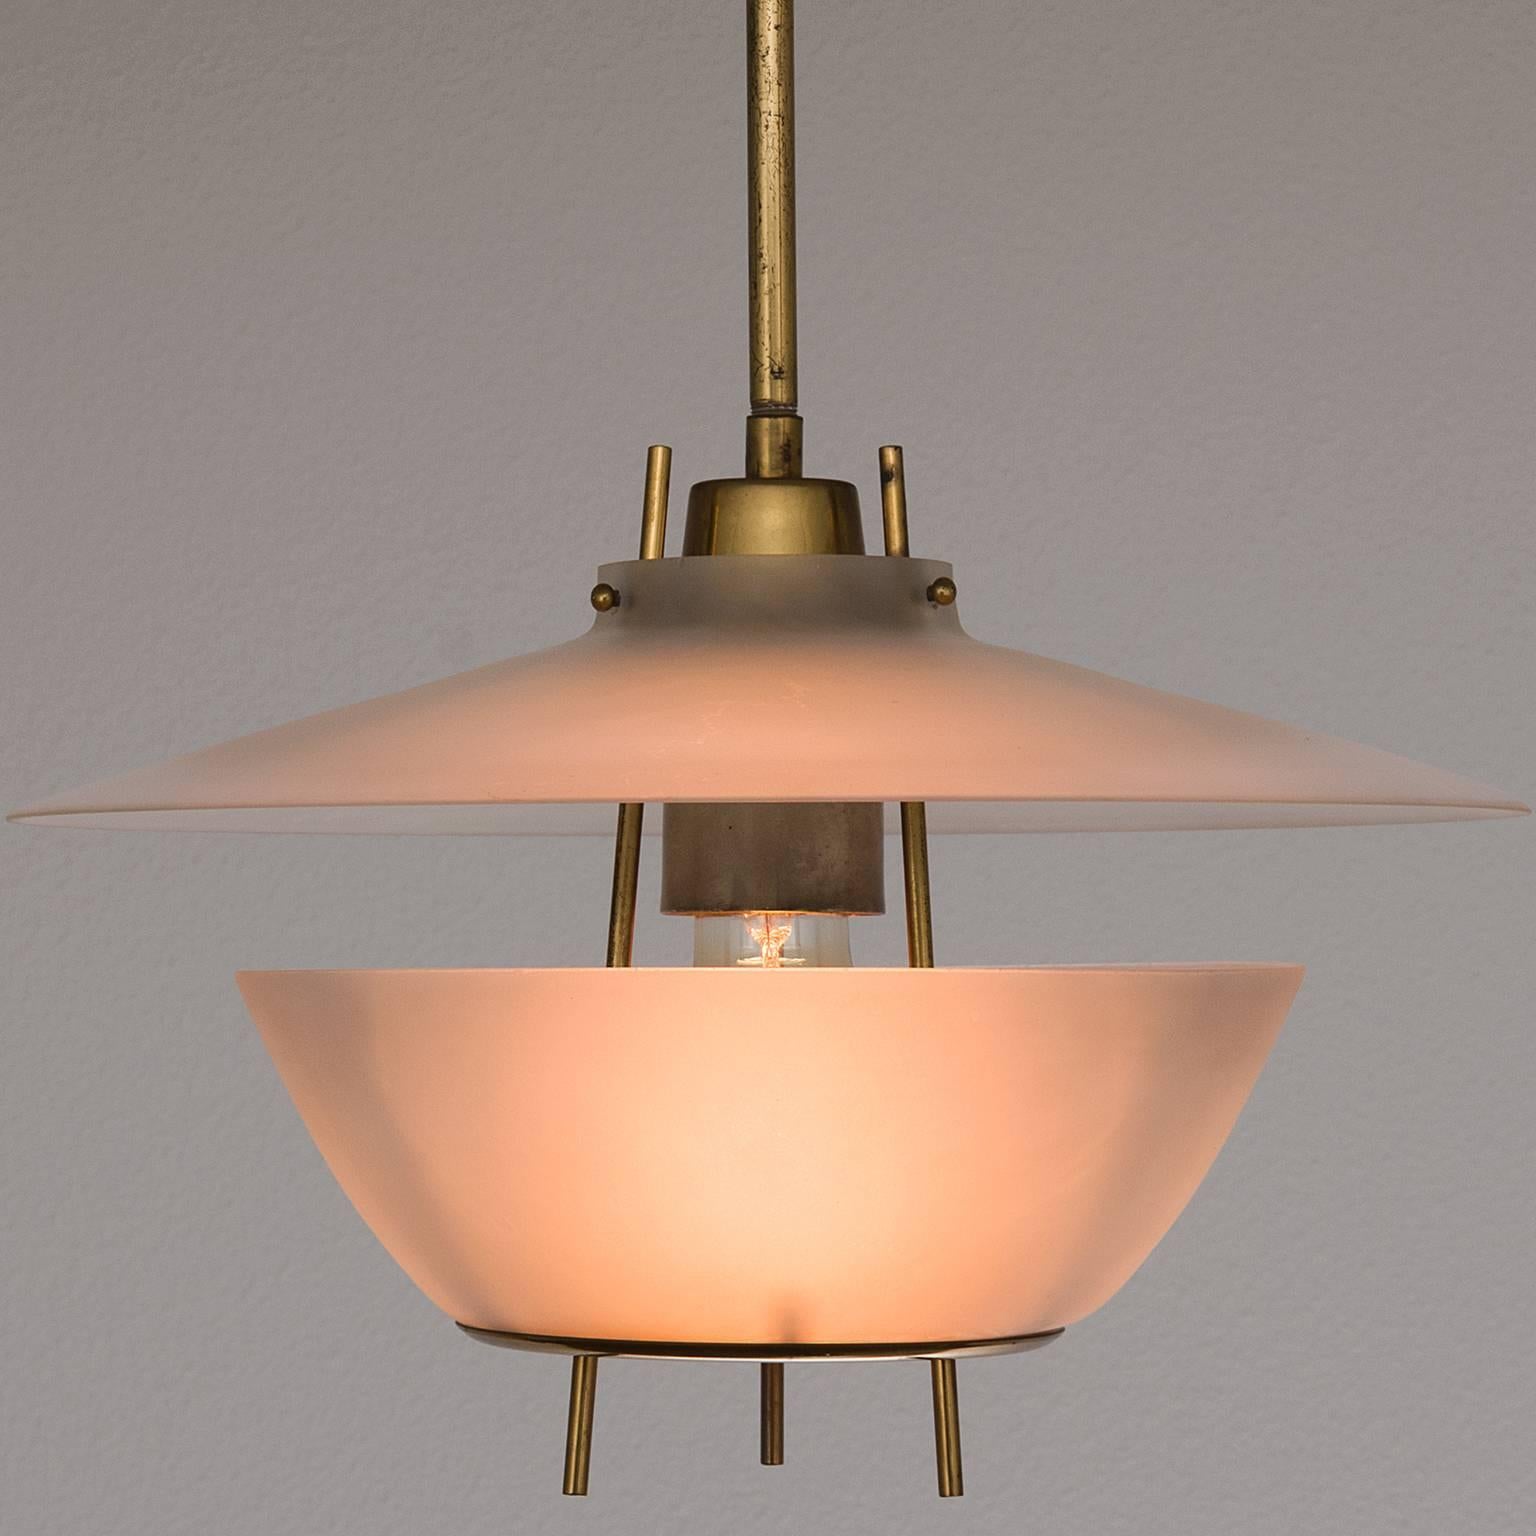 Pair of elegant pendants in brass and Lucite. Designed and manufactured by O-Luce, Italy, 1960s.

These pendants have wonderful mounting elements in brass, they show the high standard of quality and detail O-Luce is known for. The elegant shades